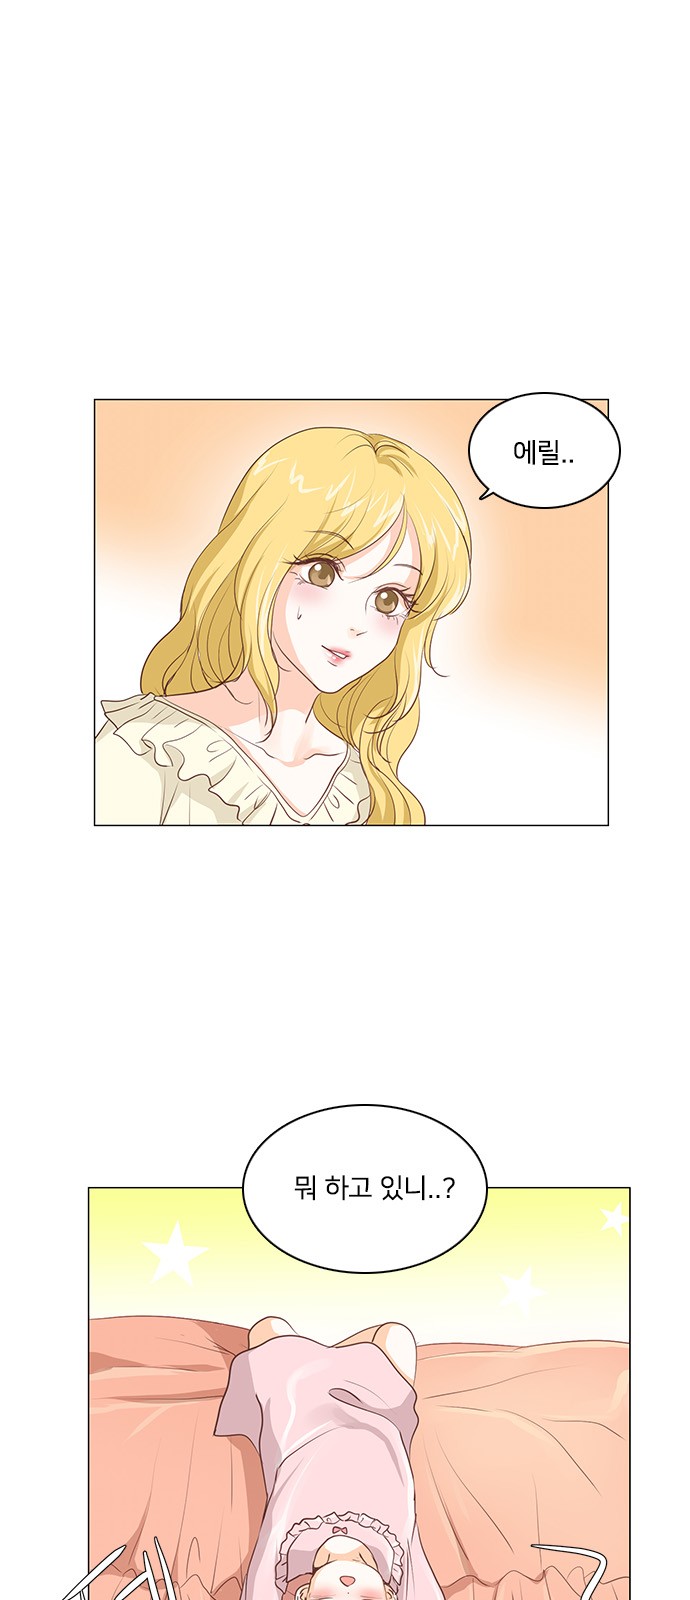 The Matchmaking Baby Princess - Chapter 34 - Page 1